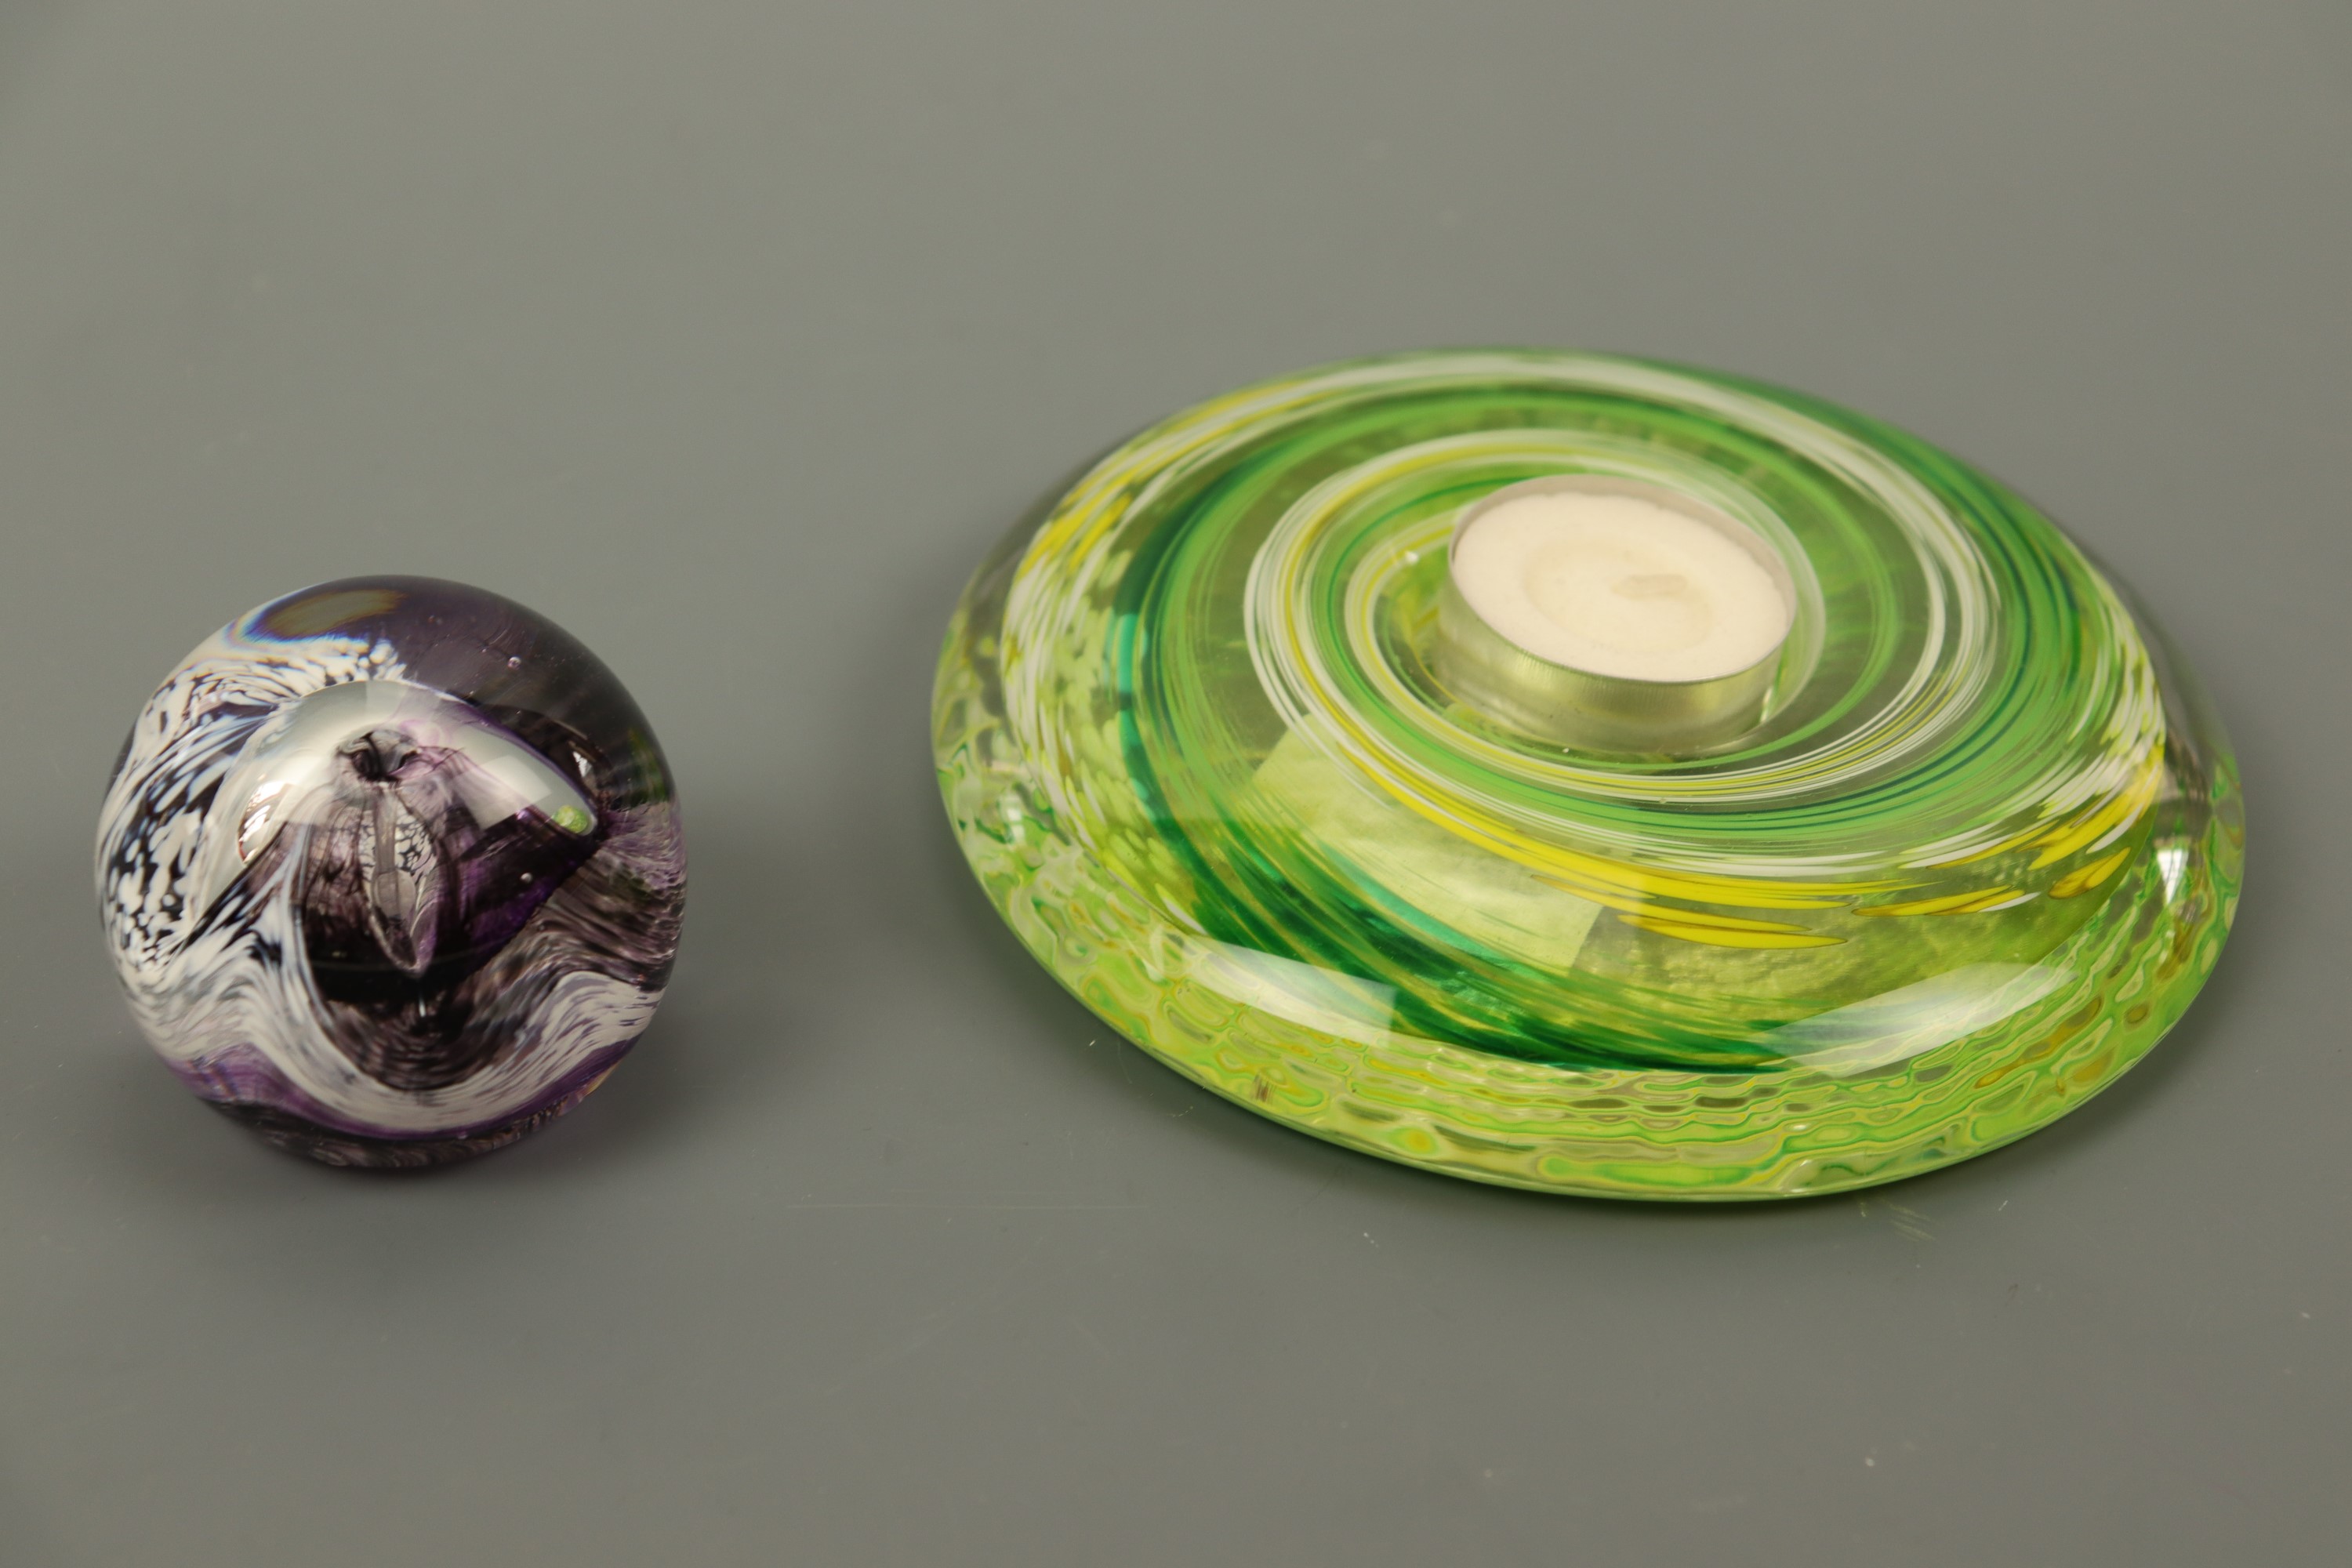 A Caithness Mooncrystal paperweight and a Scottish Borders art glass candle holder